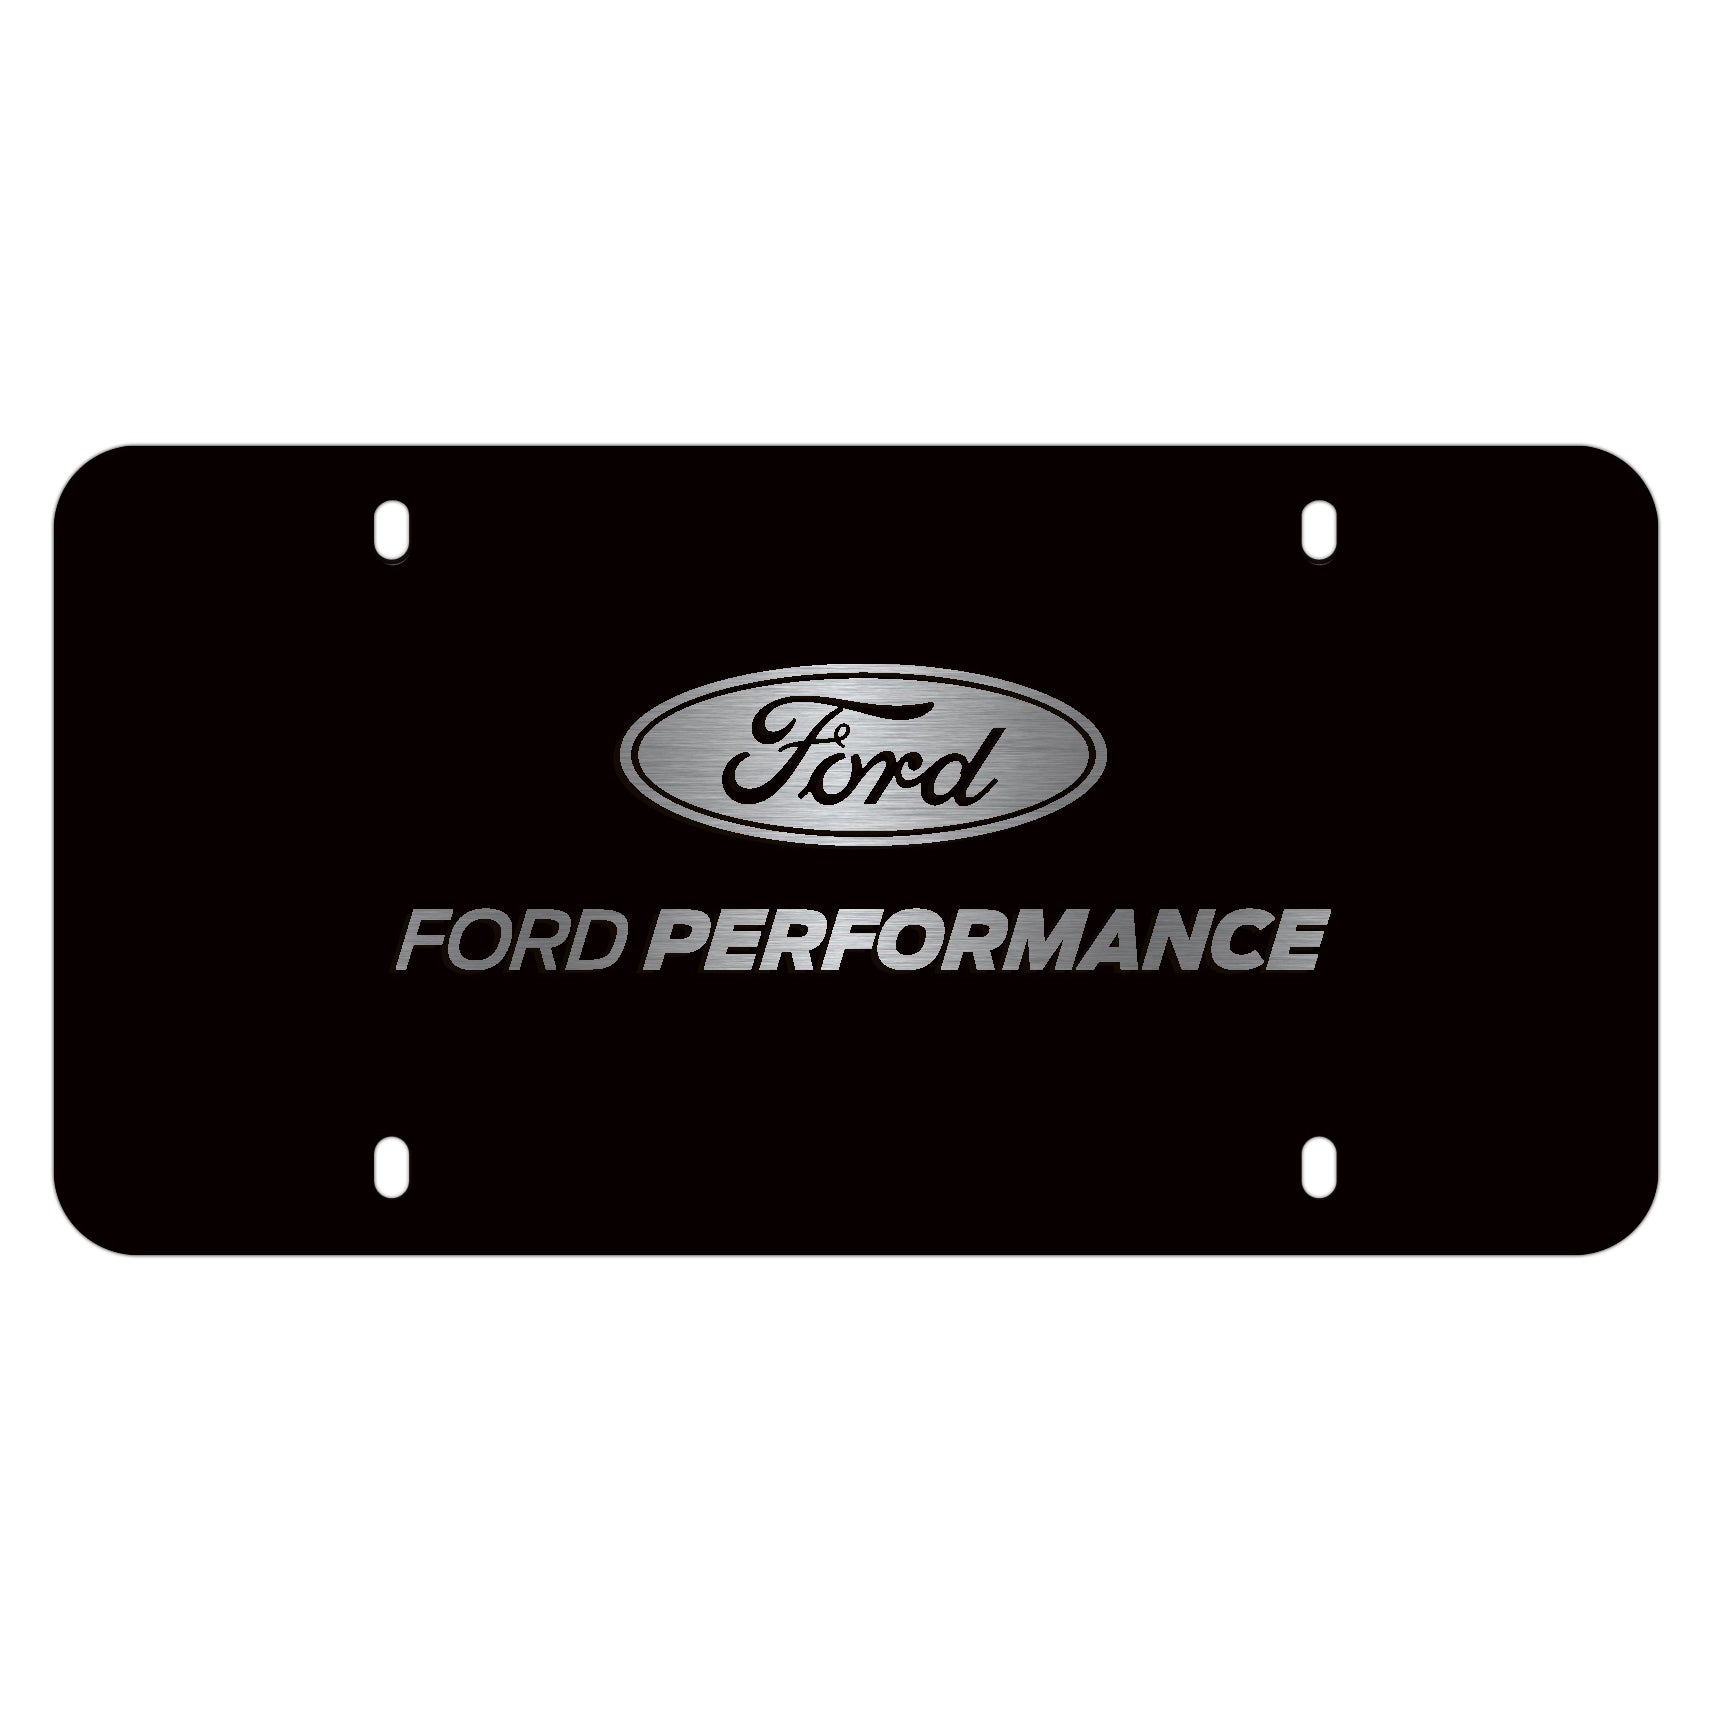 FORD PERFORMANCE BLACK STAINLESS STEEL MARQUE PLATE